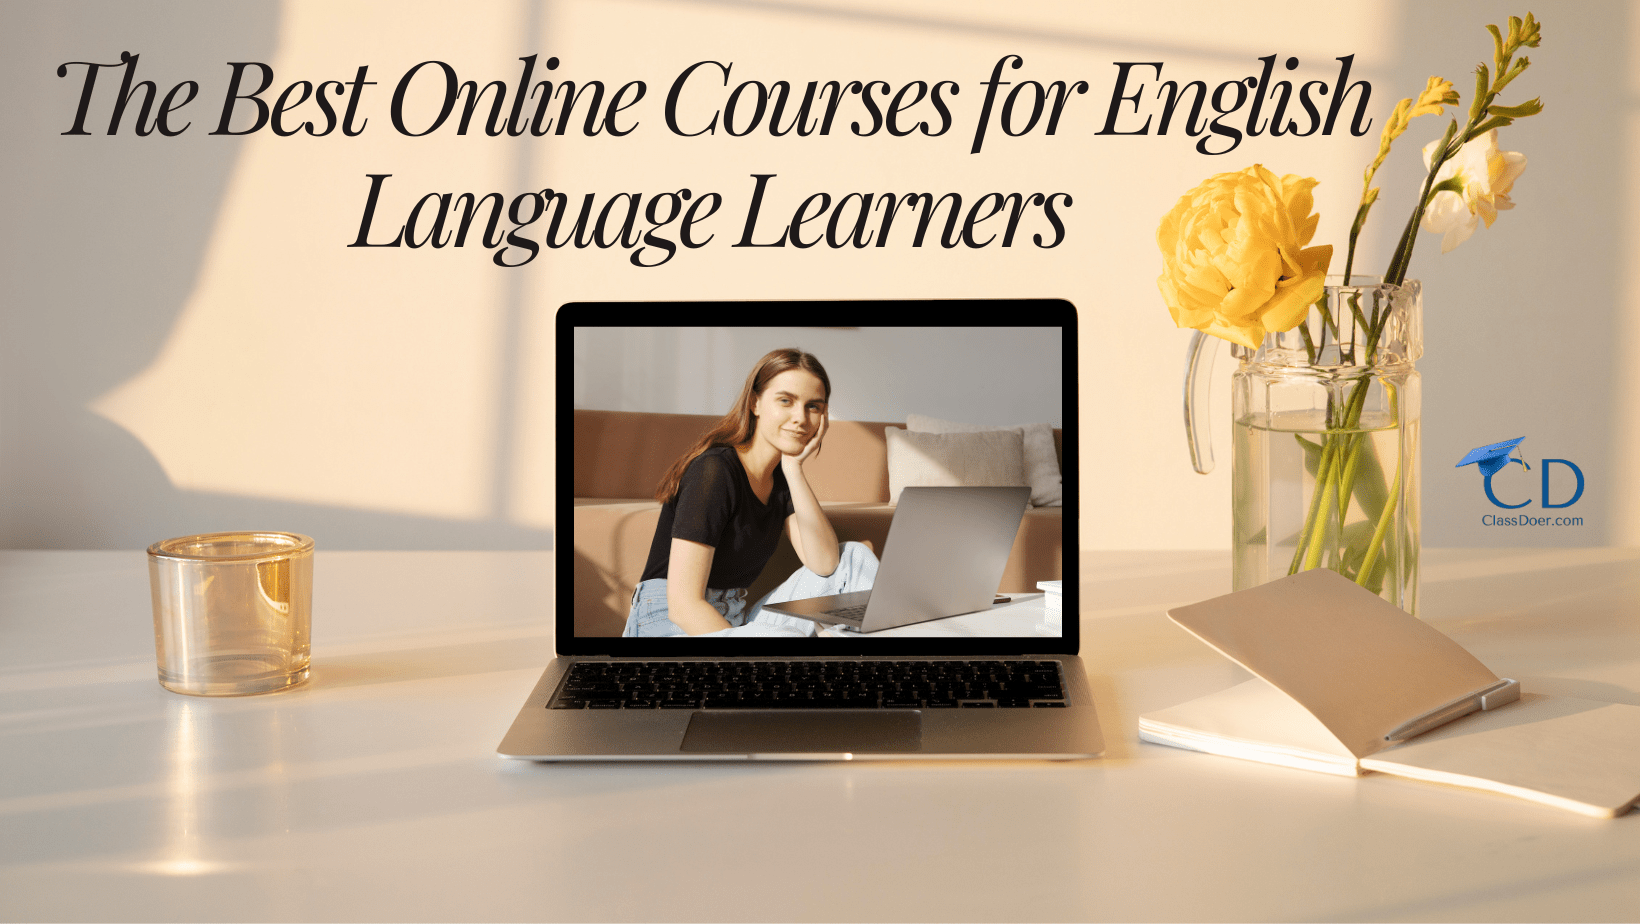 English Language Learners: The Best Online Courses to Pursue